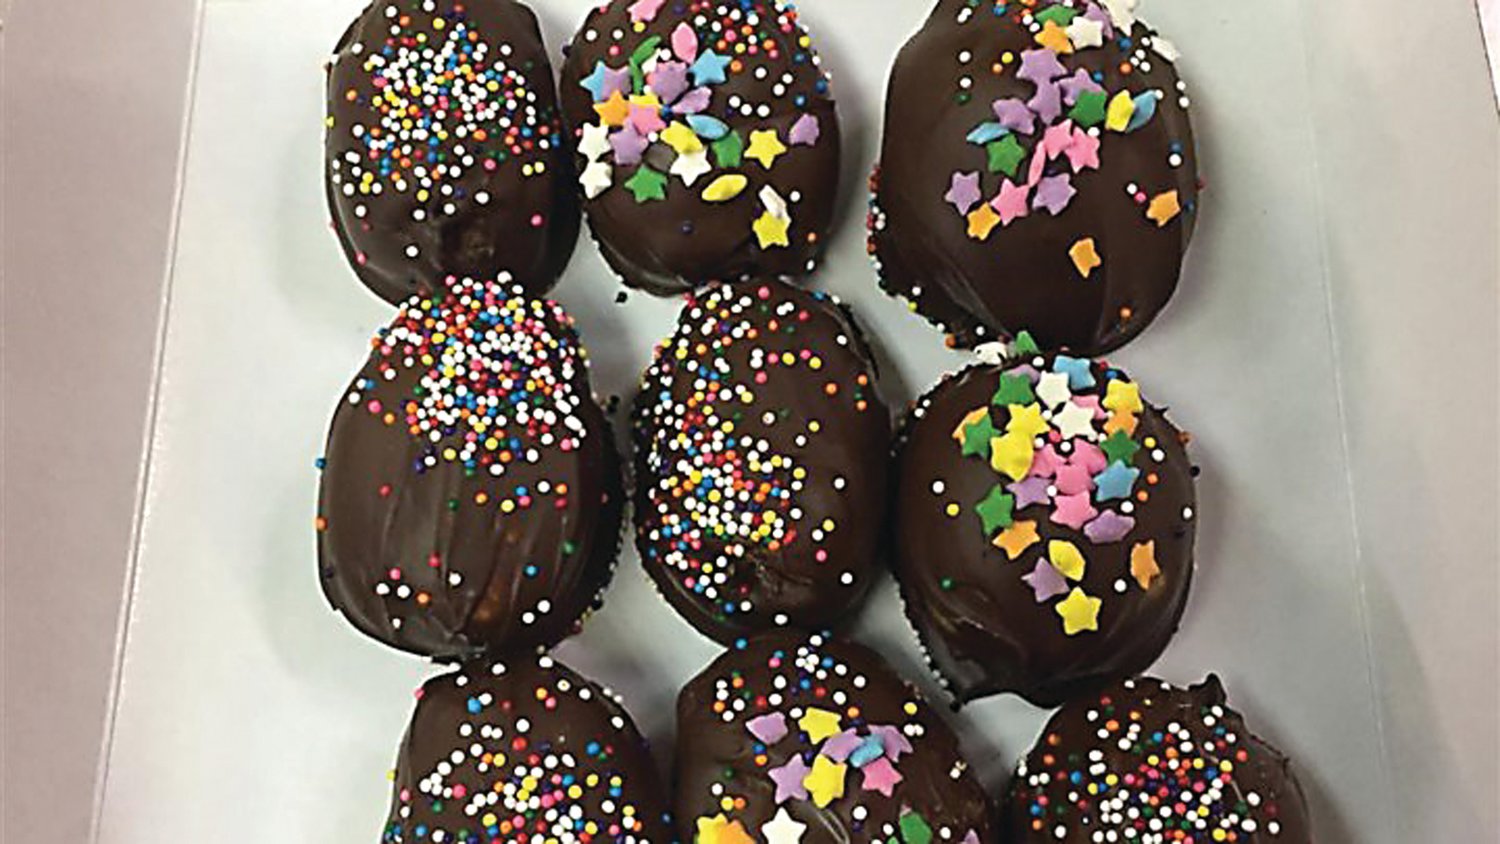 See the recipe below for how to make chocolate-covered Easter eggs with four different fillings.